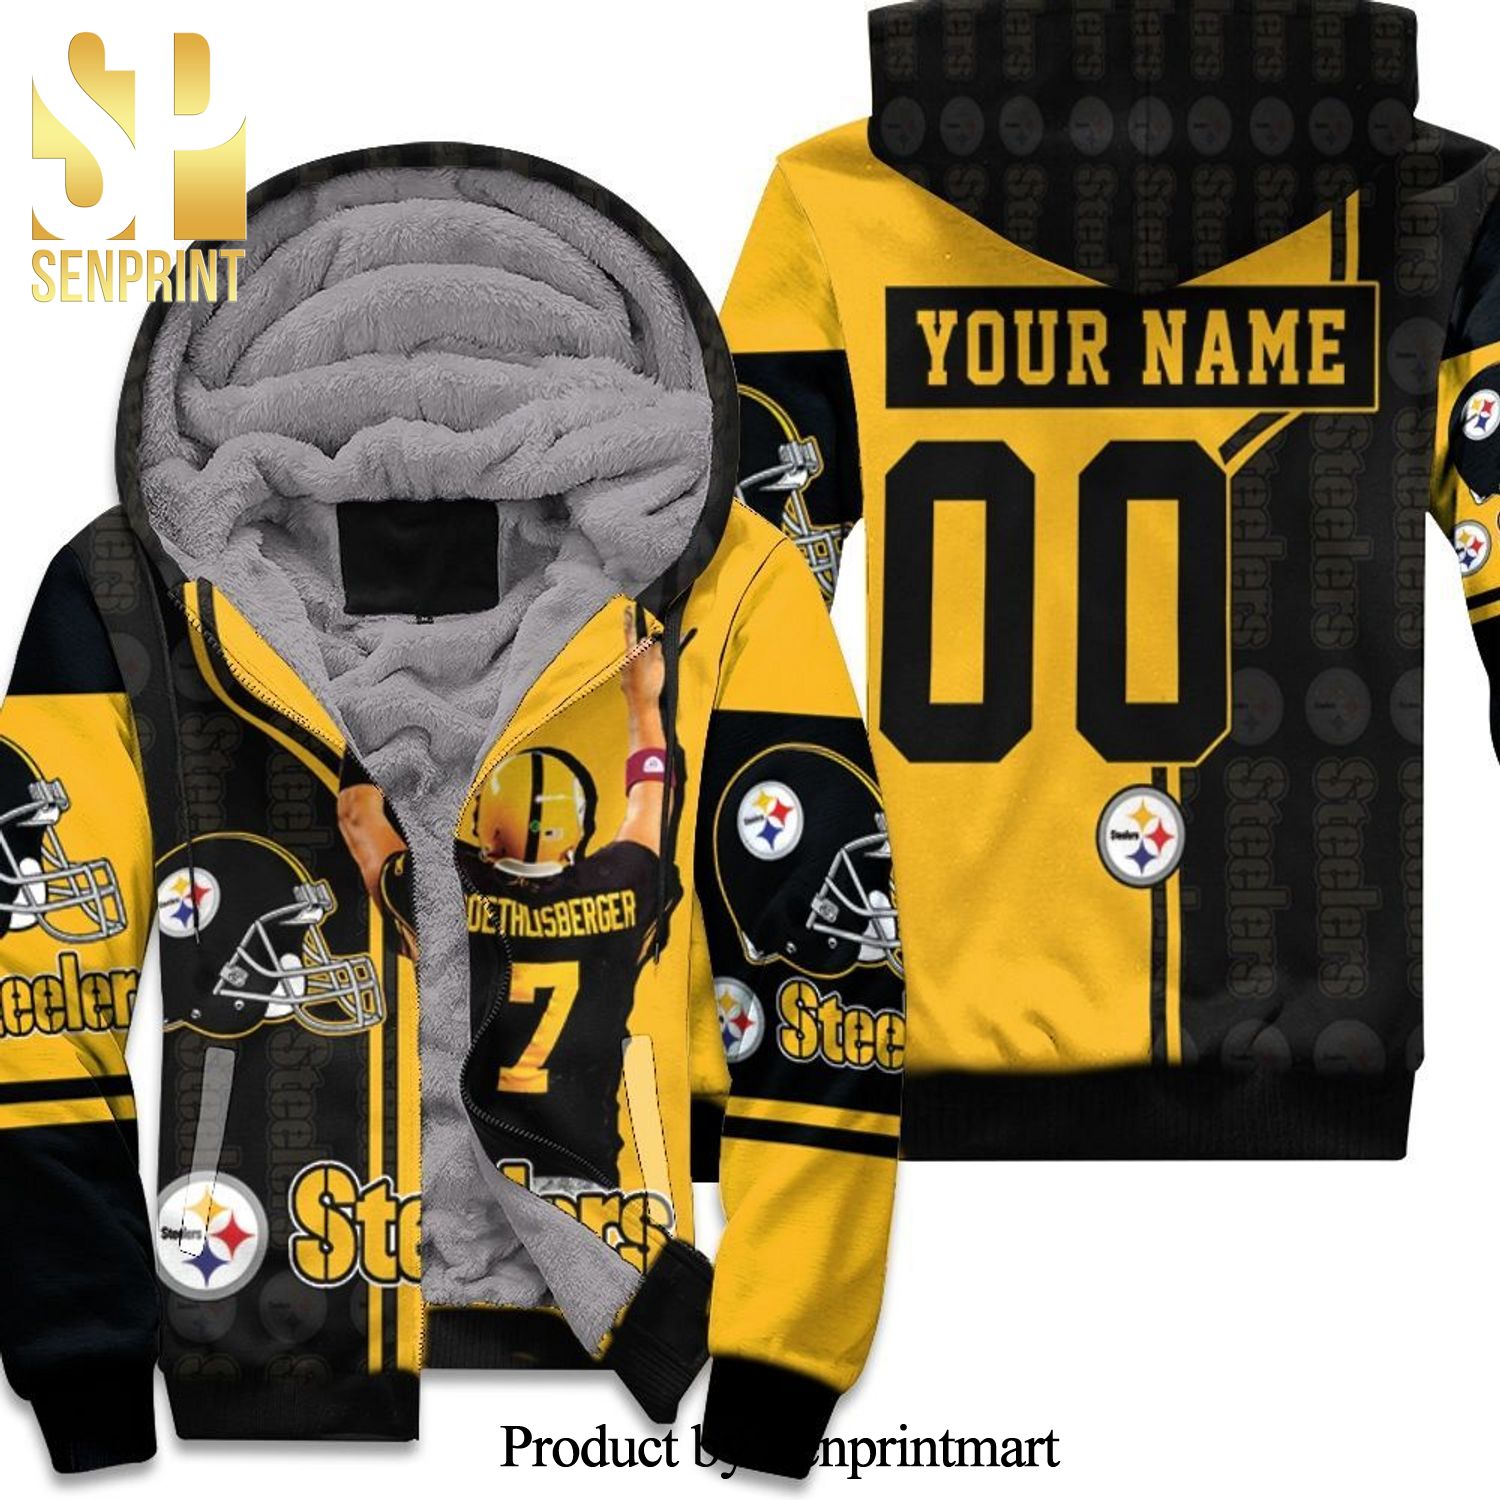 7 Ben Roethlisberger 7 Pittsburgh Steelers Personalized Great Player NFL Personalized Best Outfit 3D Unisex Fleece Hoodie